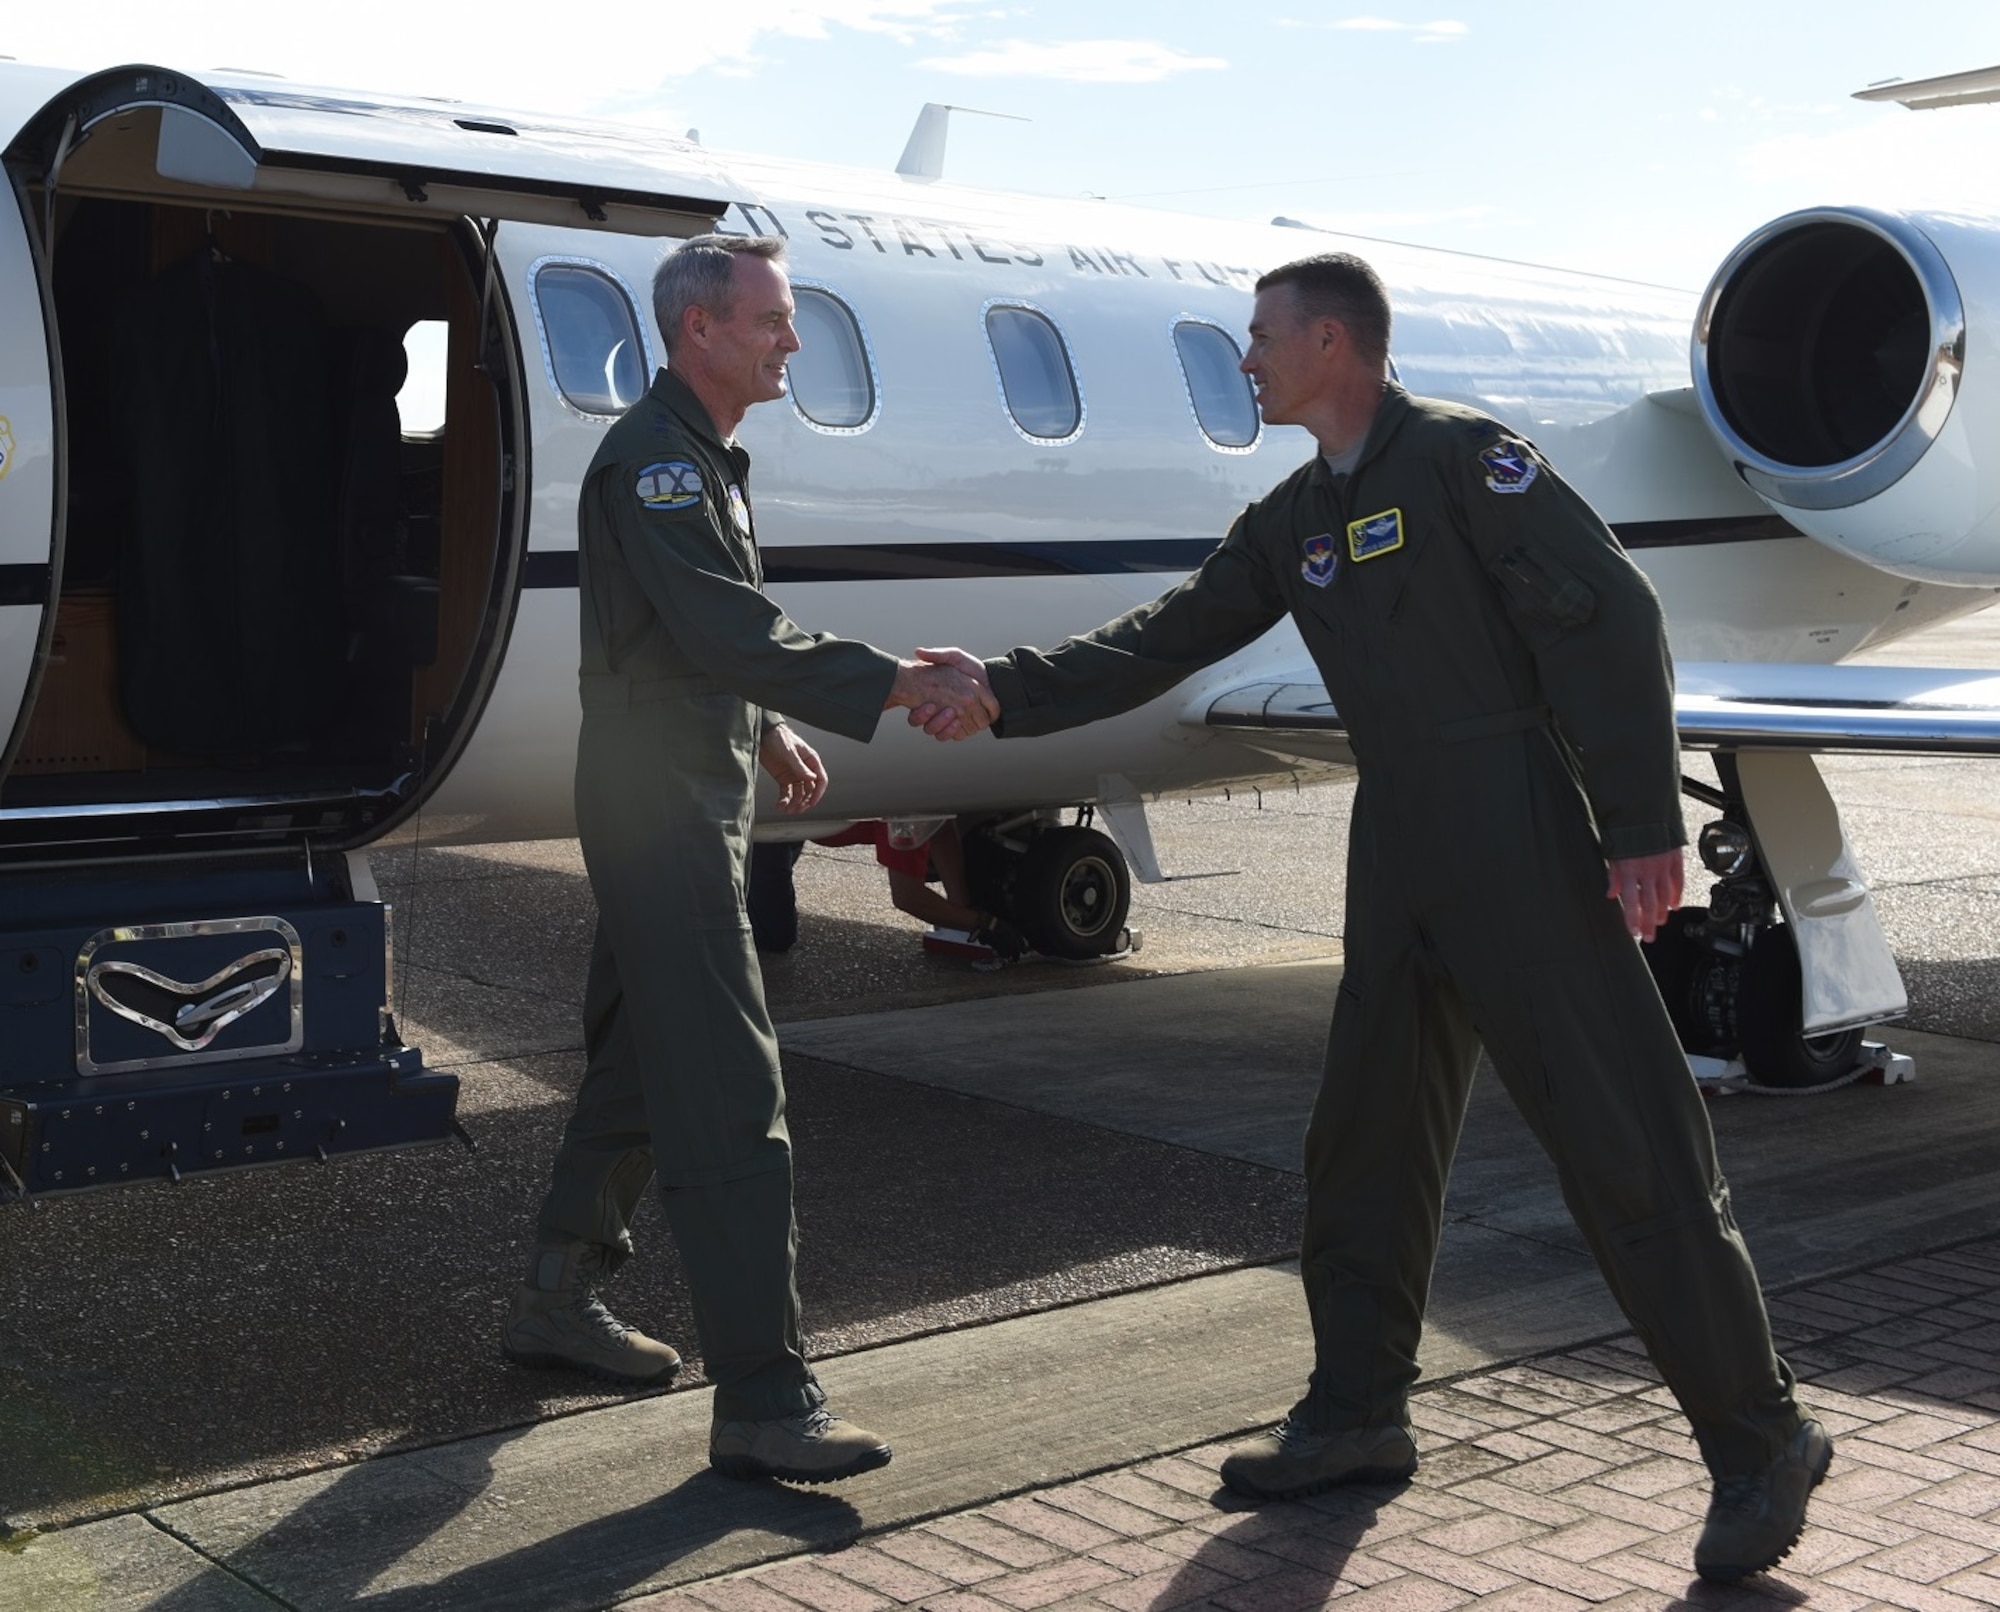 Lt. Gen. Darryl Roberson, commander of Air Education and Training Command, is greeted by Col. Douglas Gosney, 14th Flying Training Wing Commander, as he steps onto the flightline Sept. 12, 2016 at Columbus Air Force Base, Mississippi. Roberson accompanied by his wife Cheryl and Chief Master Sgt. David Staton, AETC Command Chief, visited Columbus to meet Team BLAZE. (U.S. Air Force photo/Elizabeth Owens)